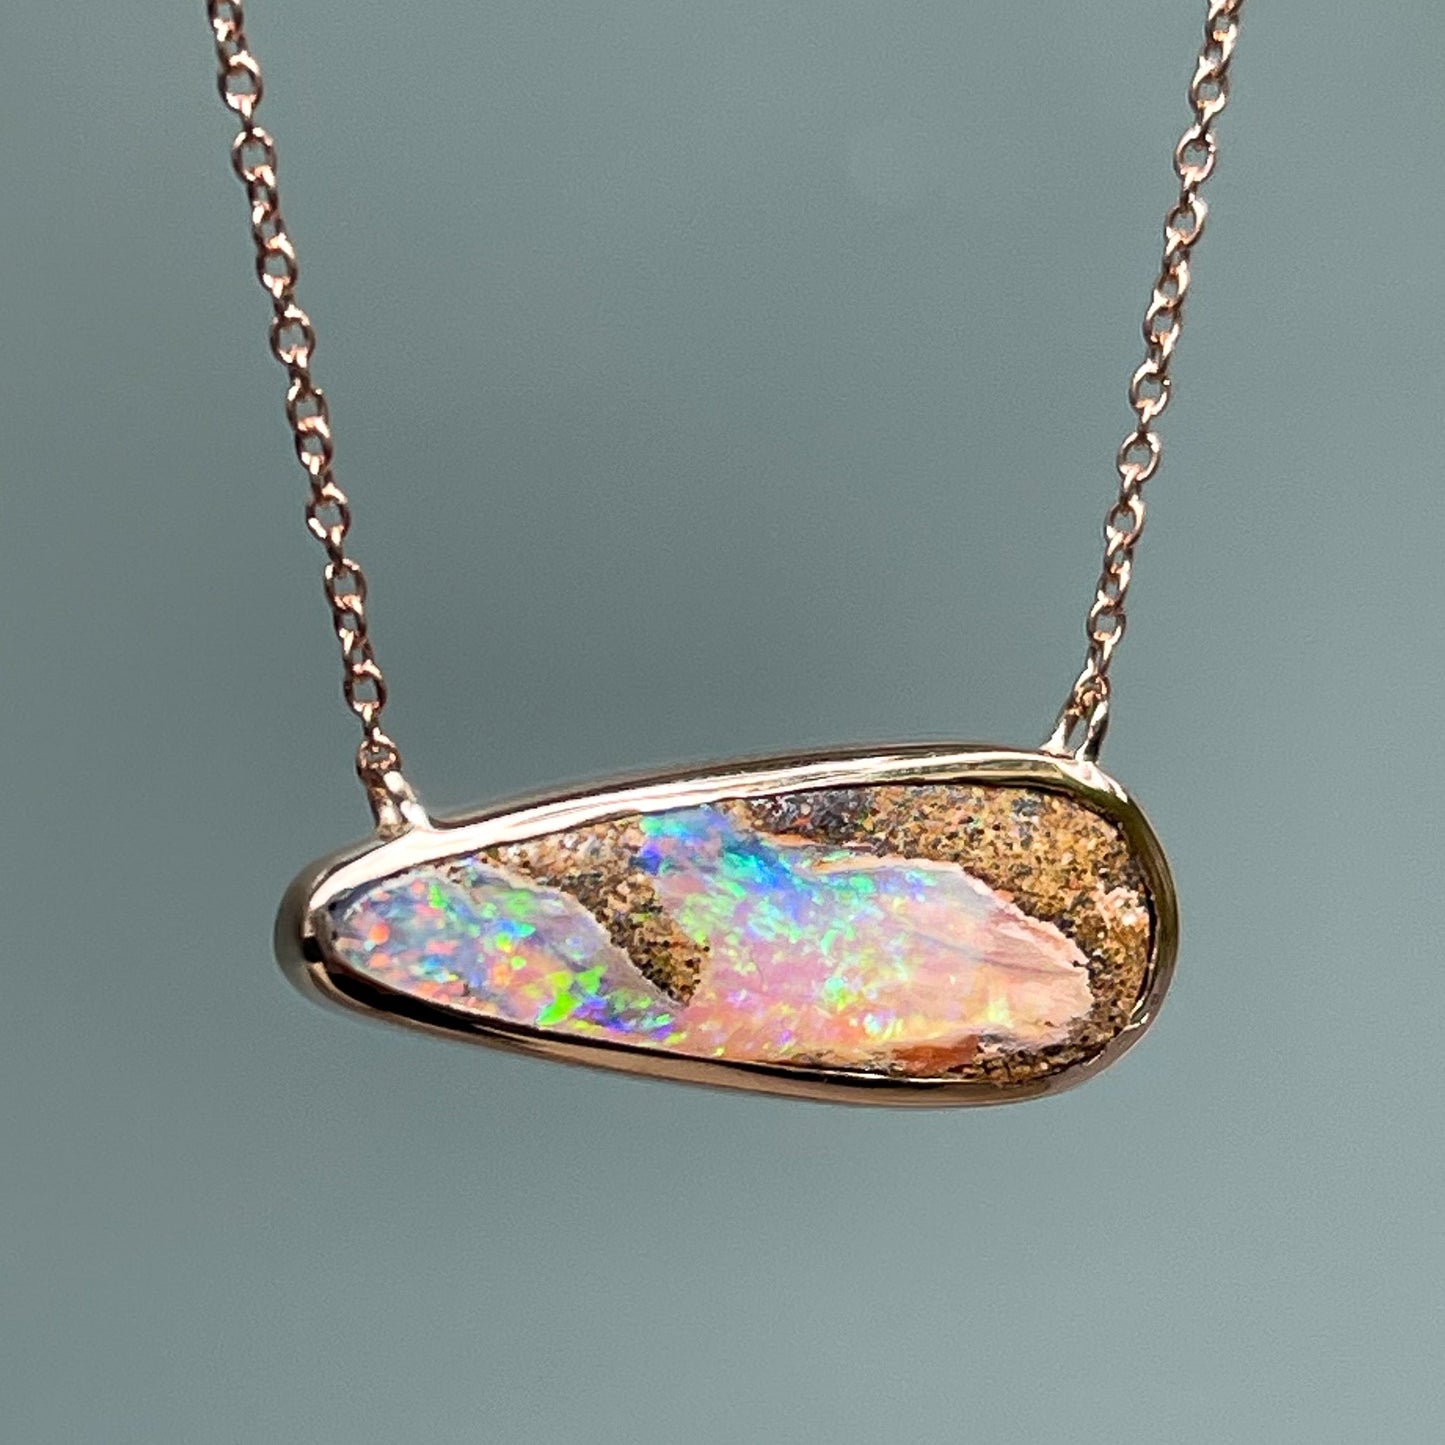 An Australian Opal Necklace by NIXIN Jewelry hangs in front of a frosted glass backdrop. The pipe opal is set in a rose gold bezel setting.